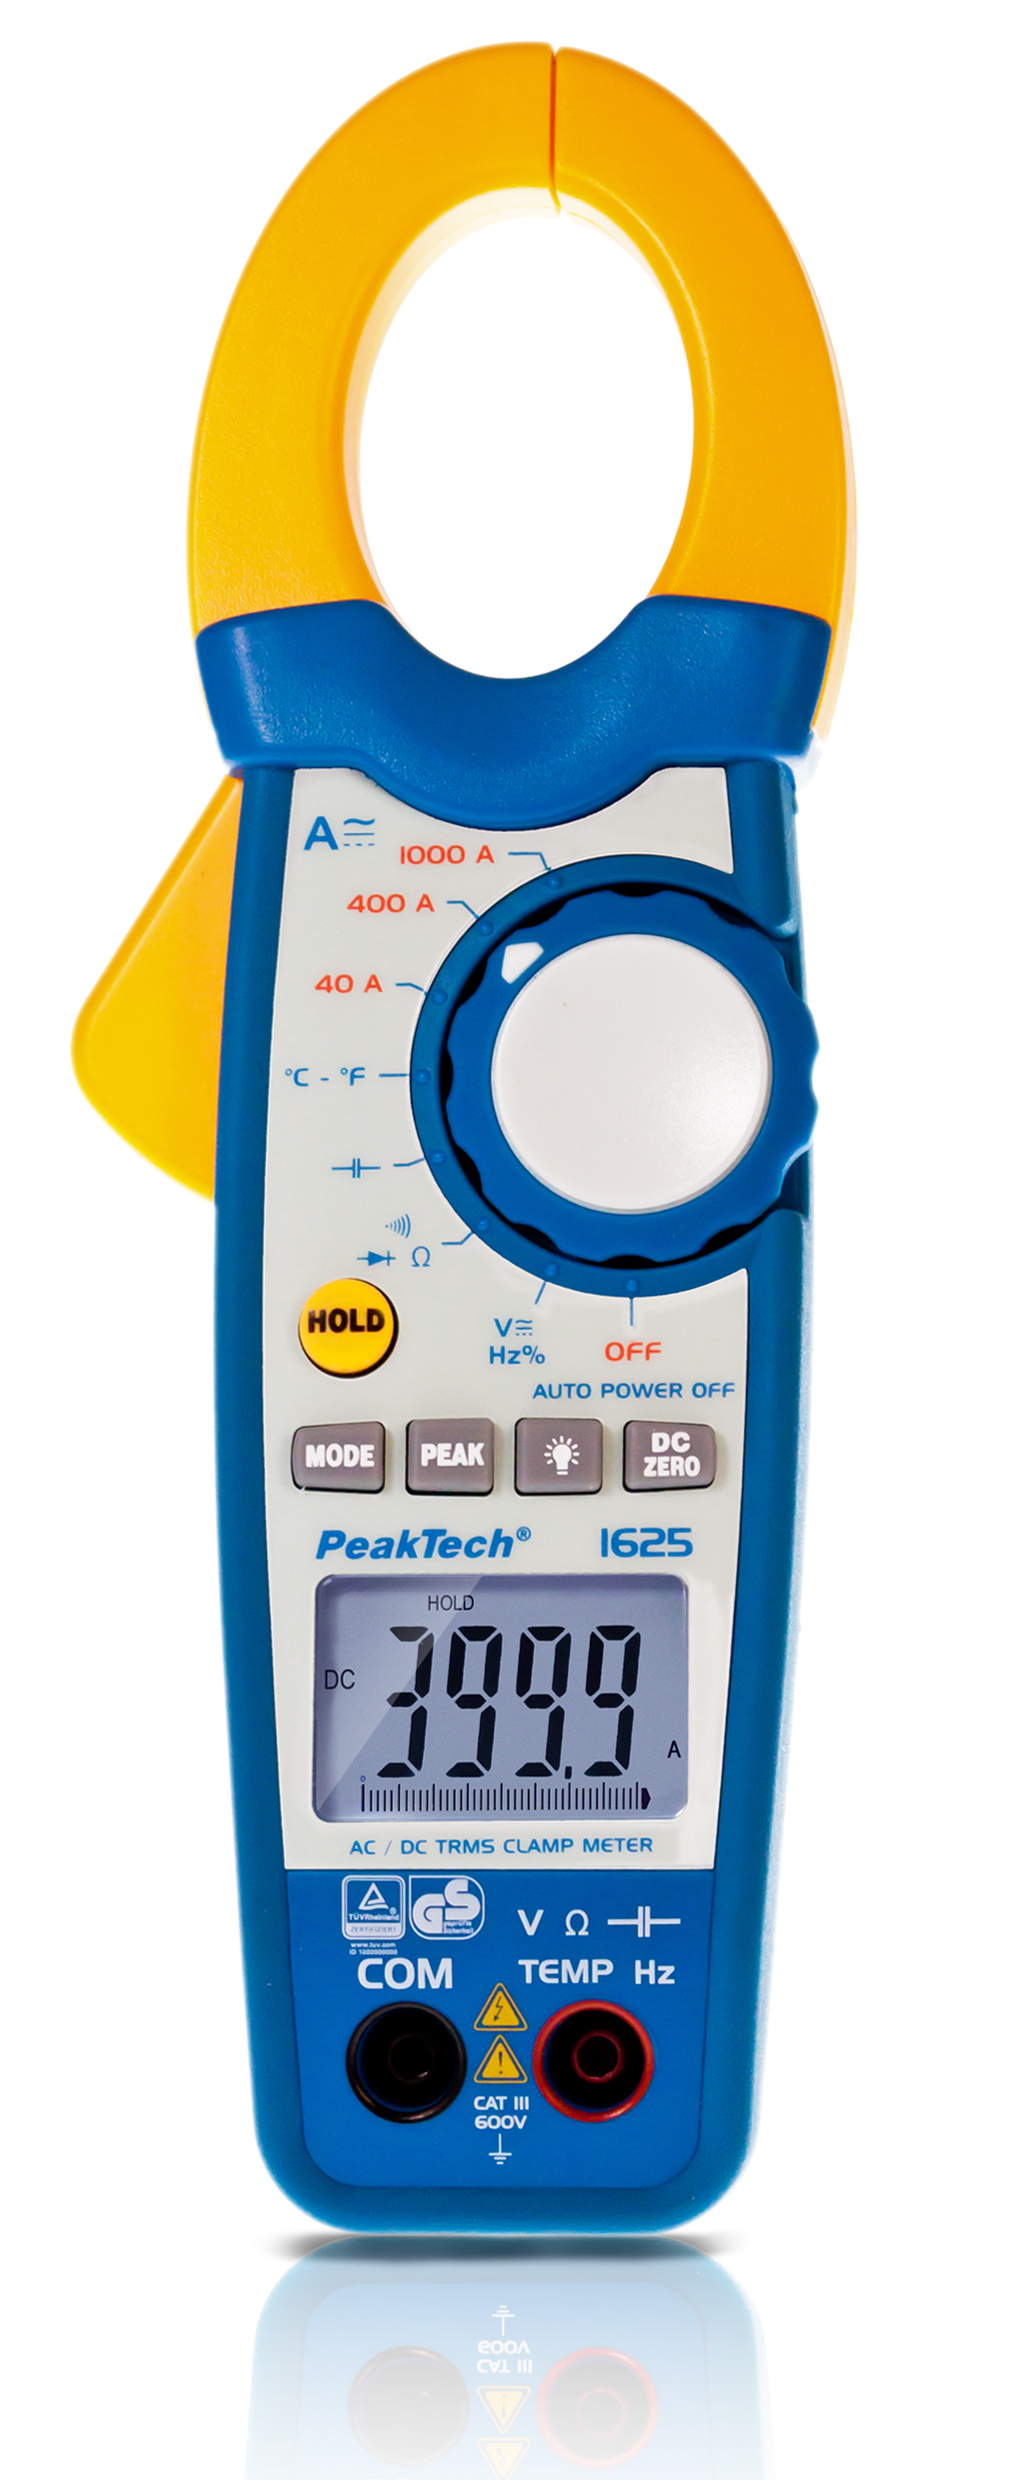 «PeakTech® P 1625» TrueRMS clamp meter 4,000 counts 1000 A AC/DC